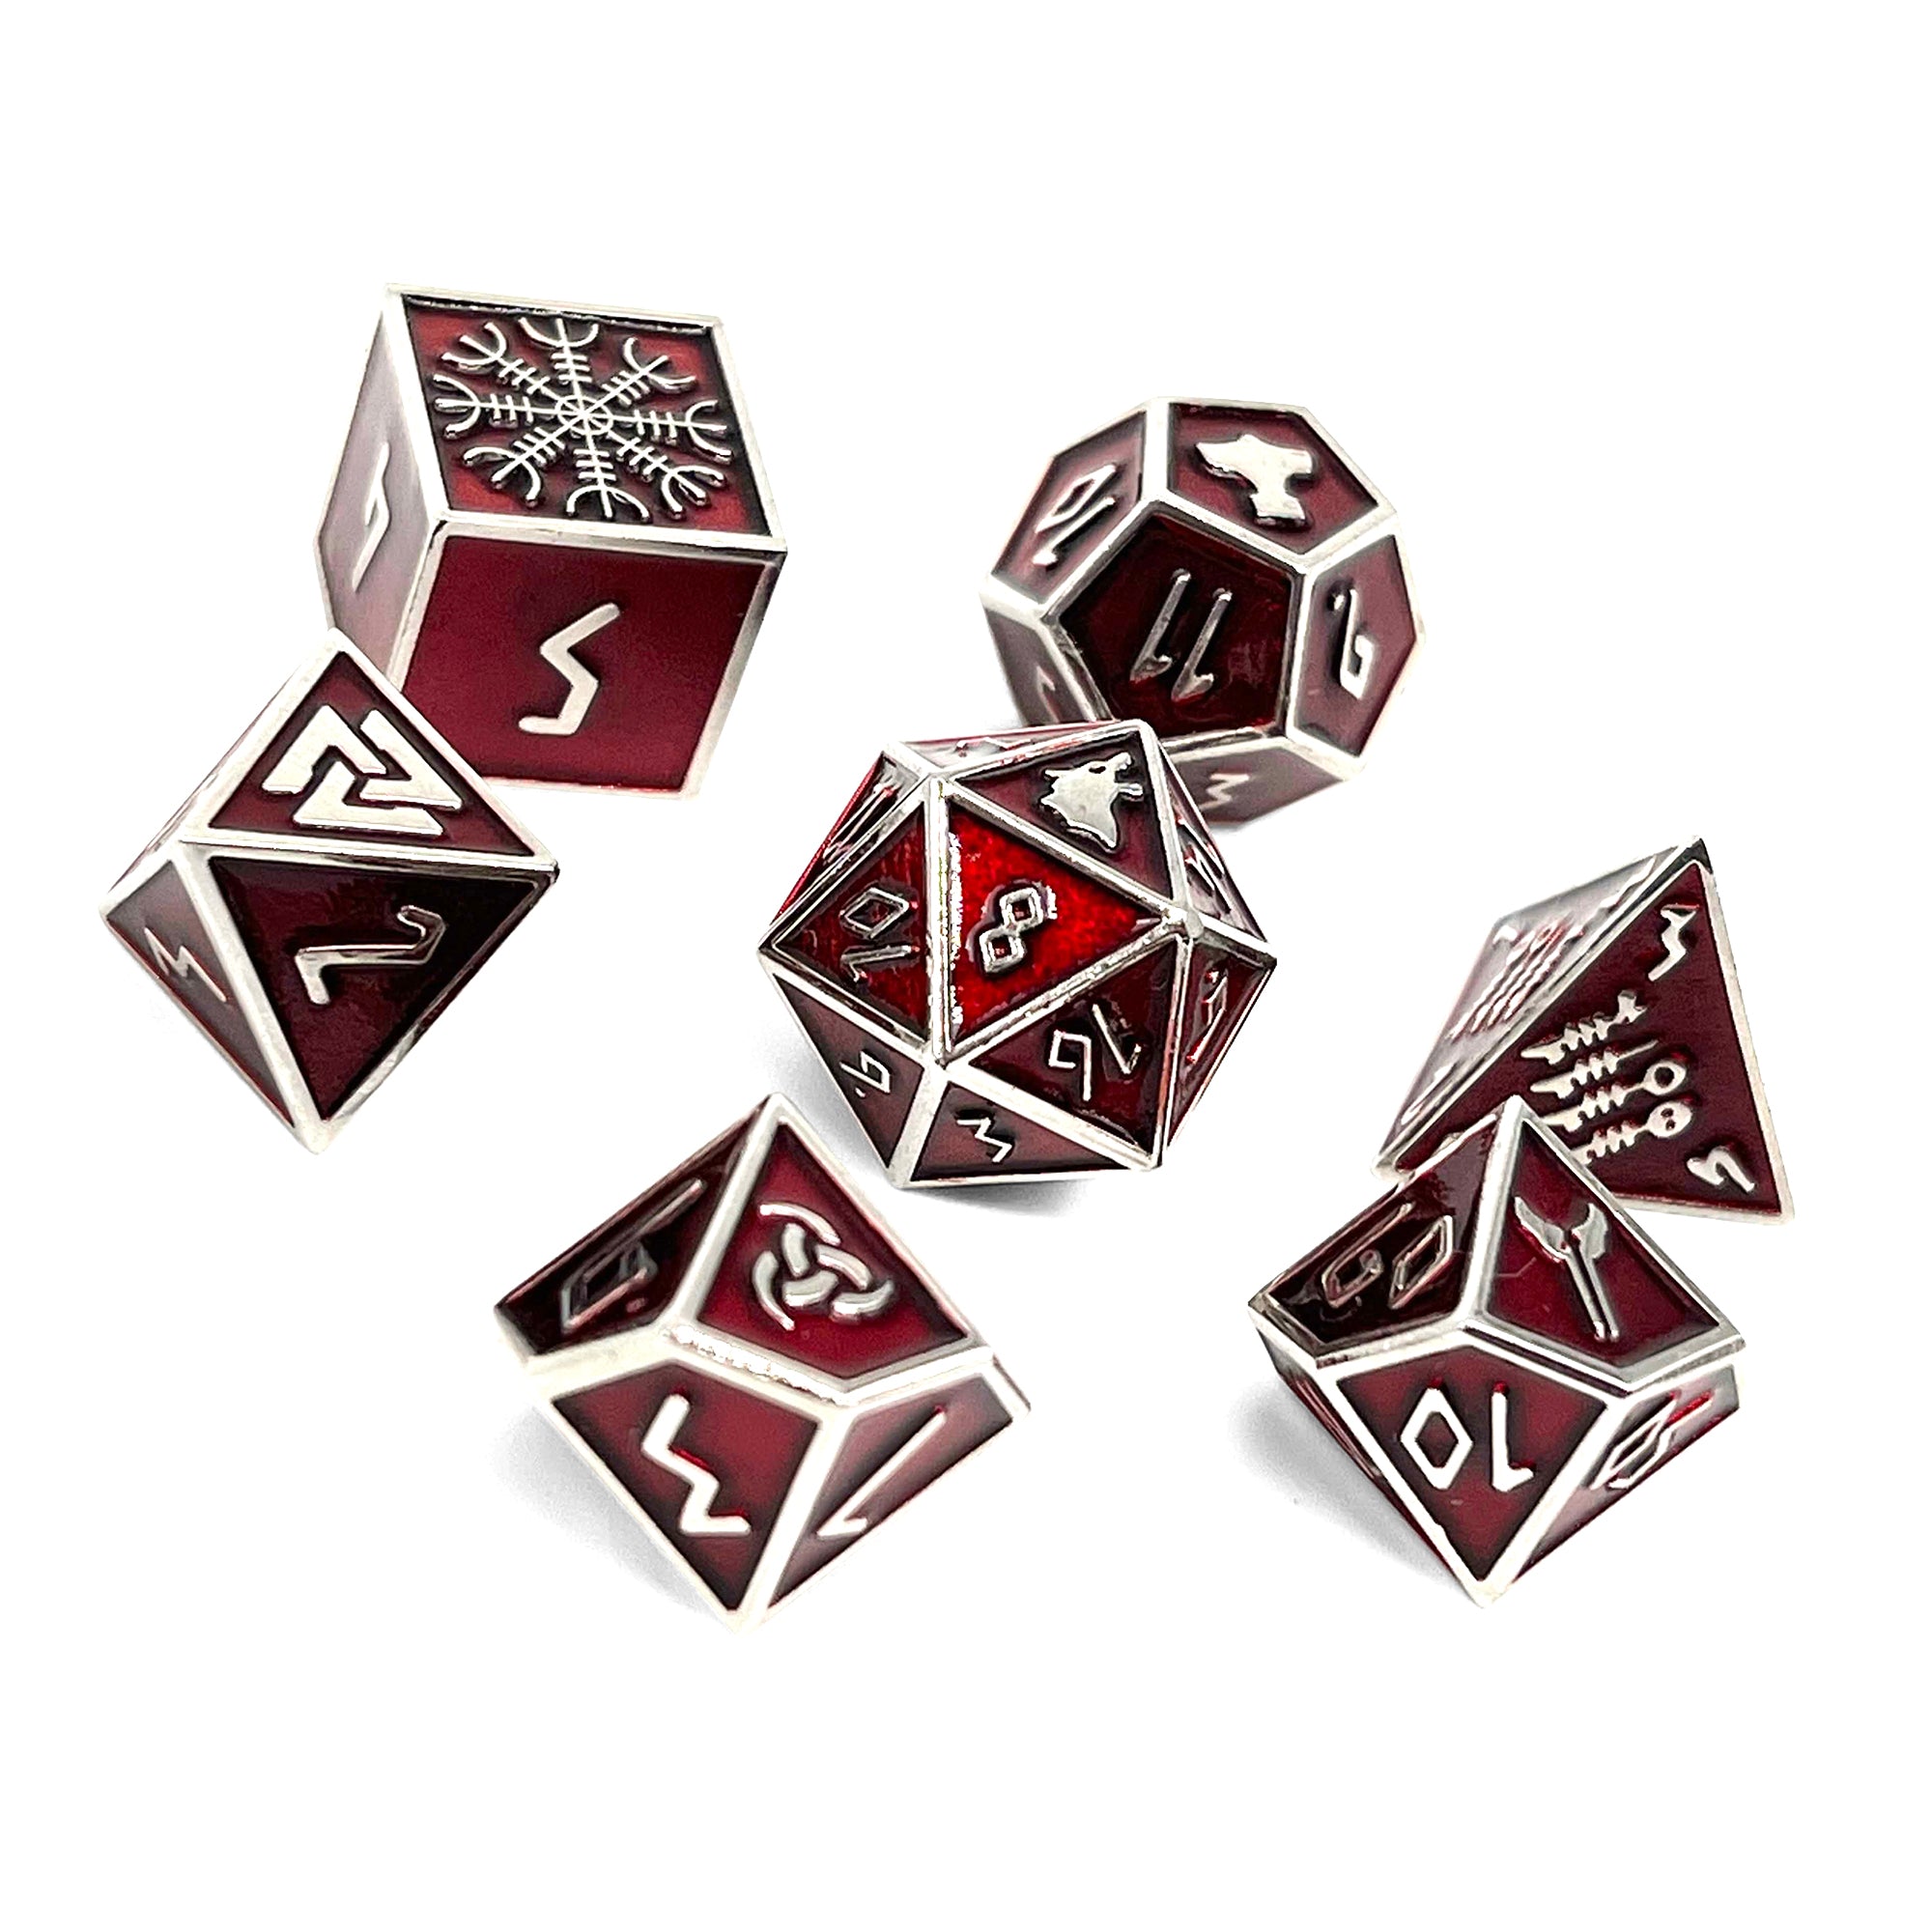 Vampire Blood - Norse Themed Metal Dice Set